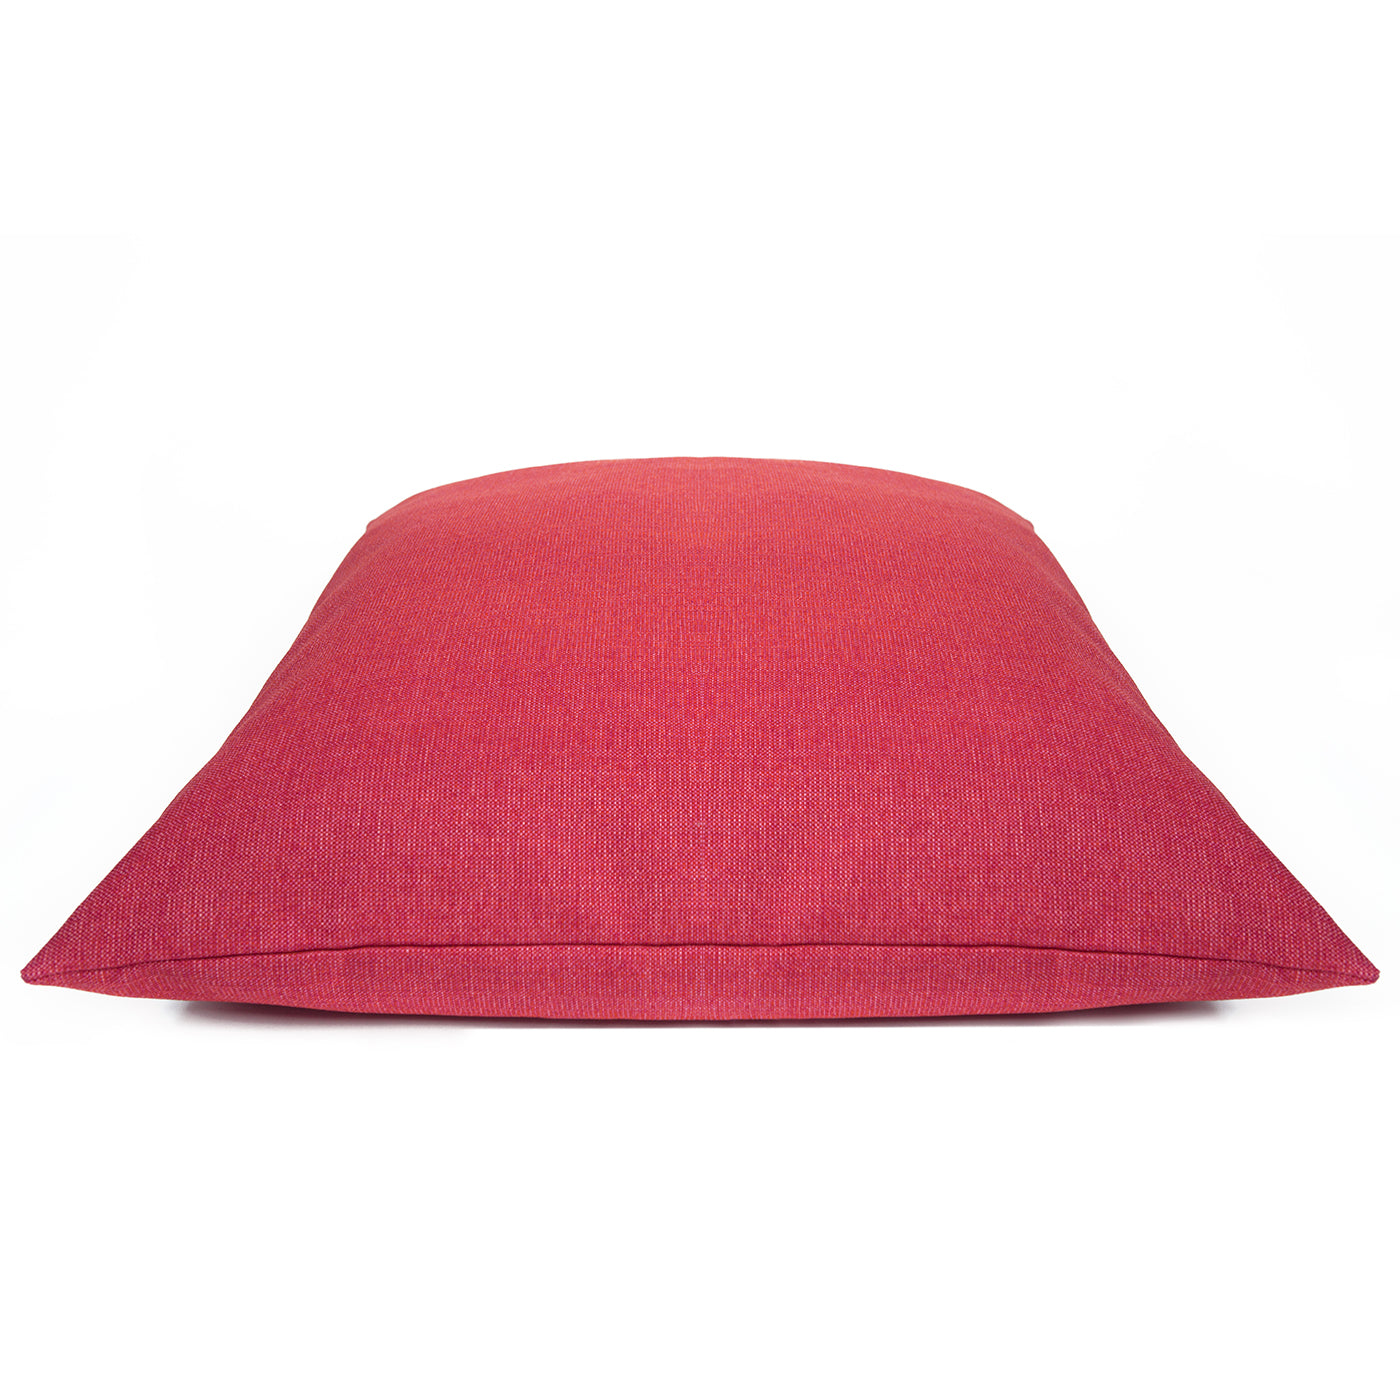 The Lounging Hound Twist Pillow Bed In Cerise, Luxury Dog Beds & Pillows, Available Now at Lords & Labradors